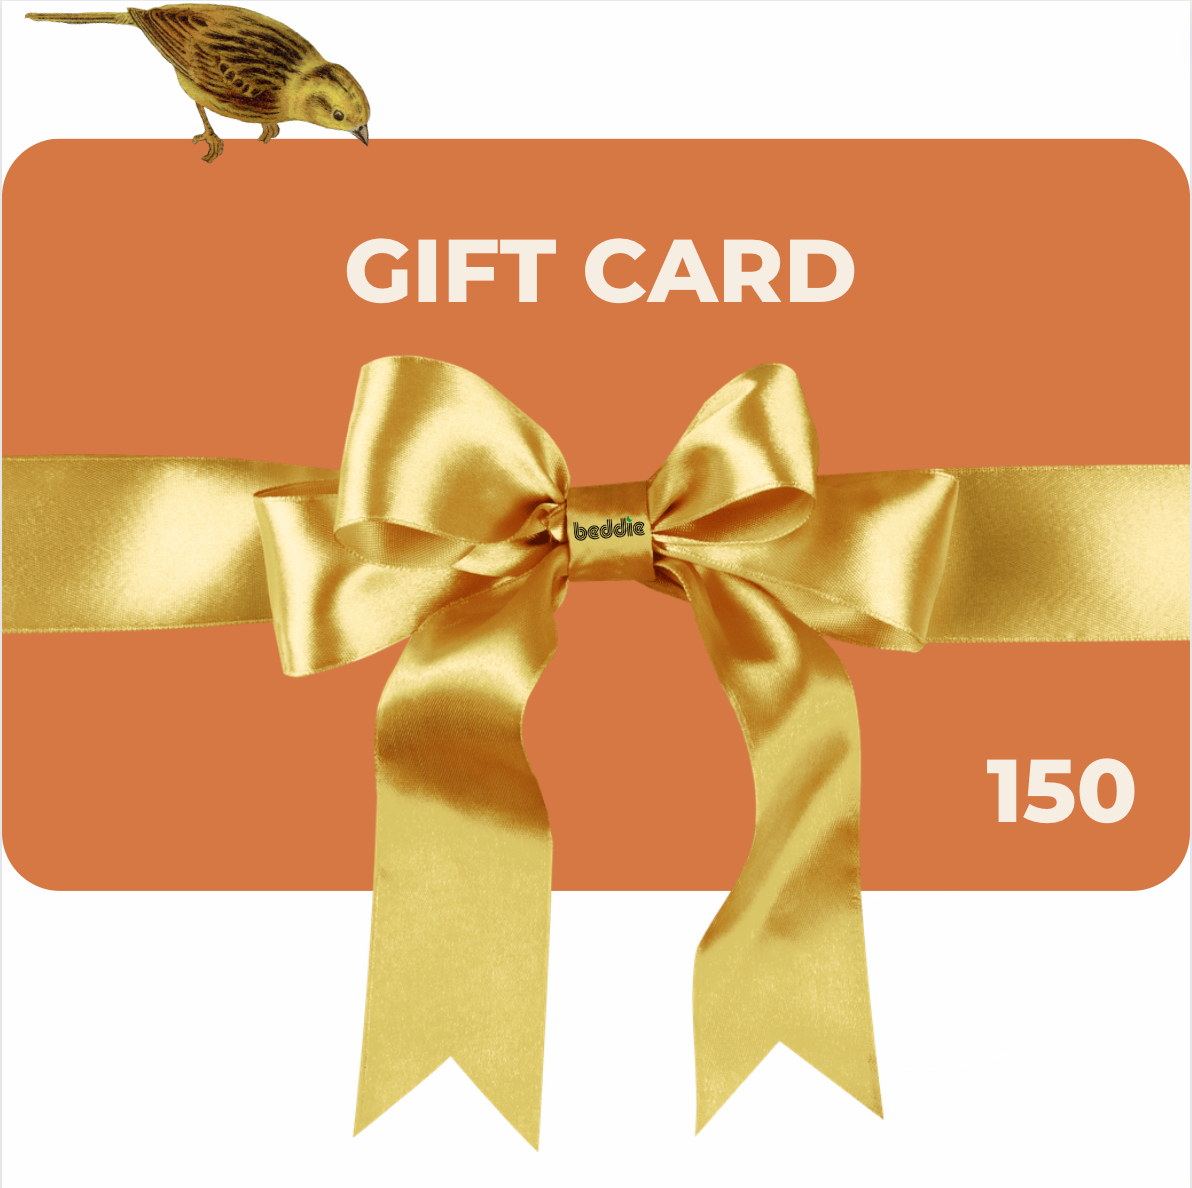 Beddie Gift Card $150. Gift Giving made Easy!